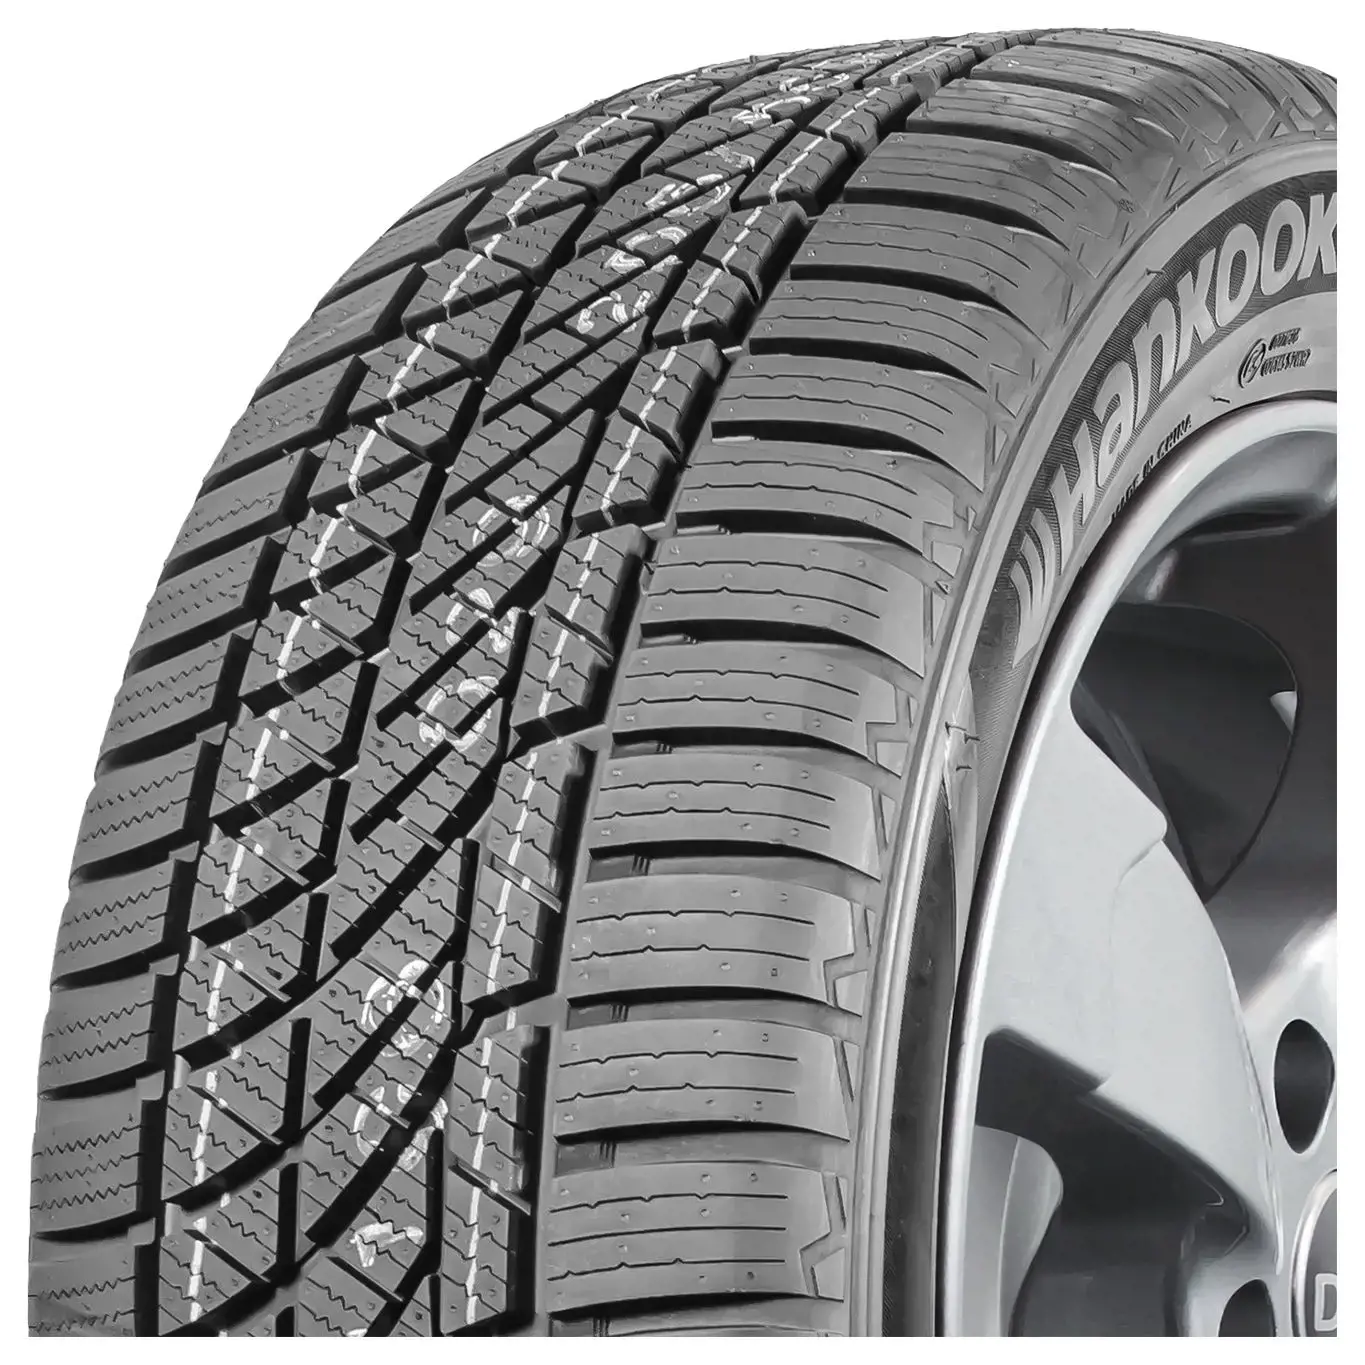 155/80 R13 79T Kinergy 4S H740 SP M+S